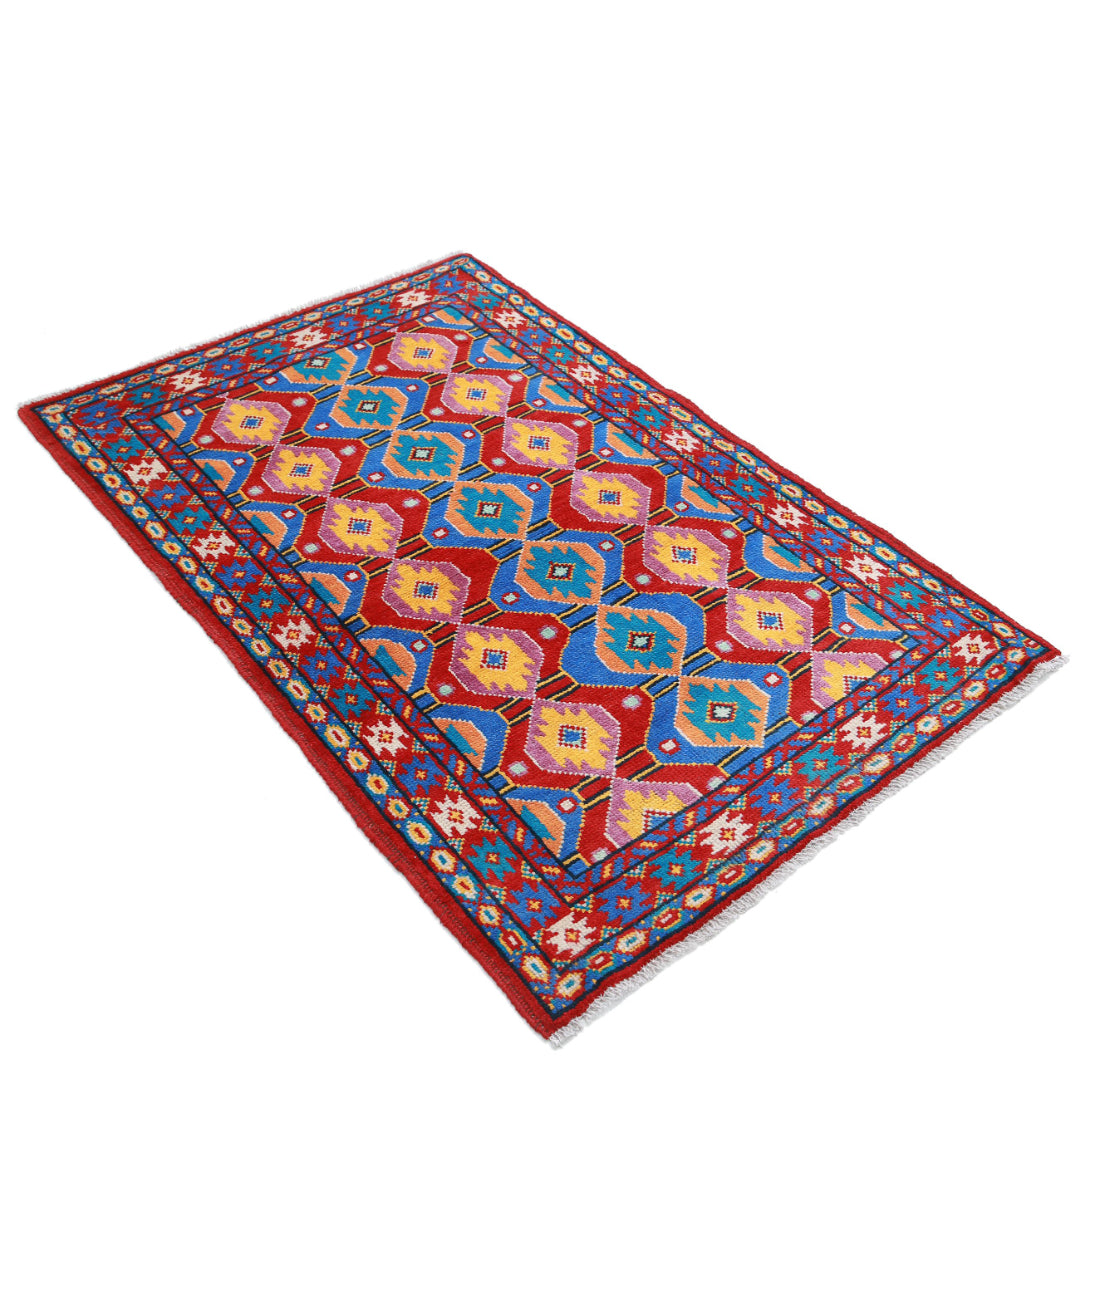 Revival 3'2'' X 4'10'' Hand-Knotted Wool Rug 3'2'' x 4'10'' (95 X 145) / Red / Blue